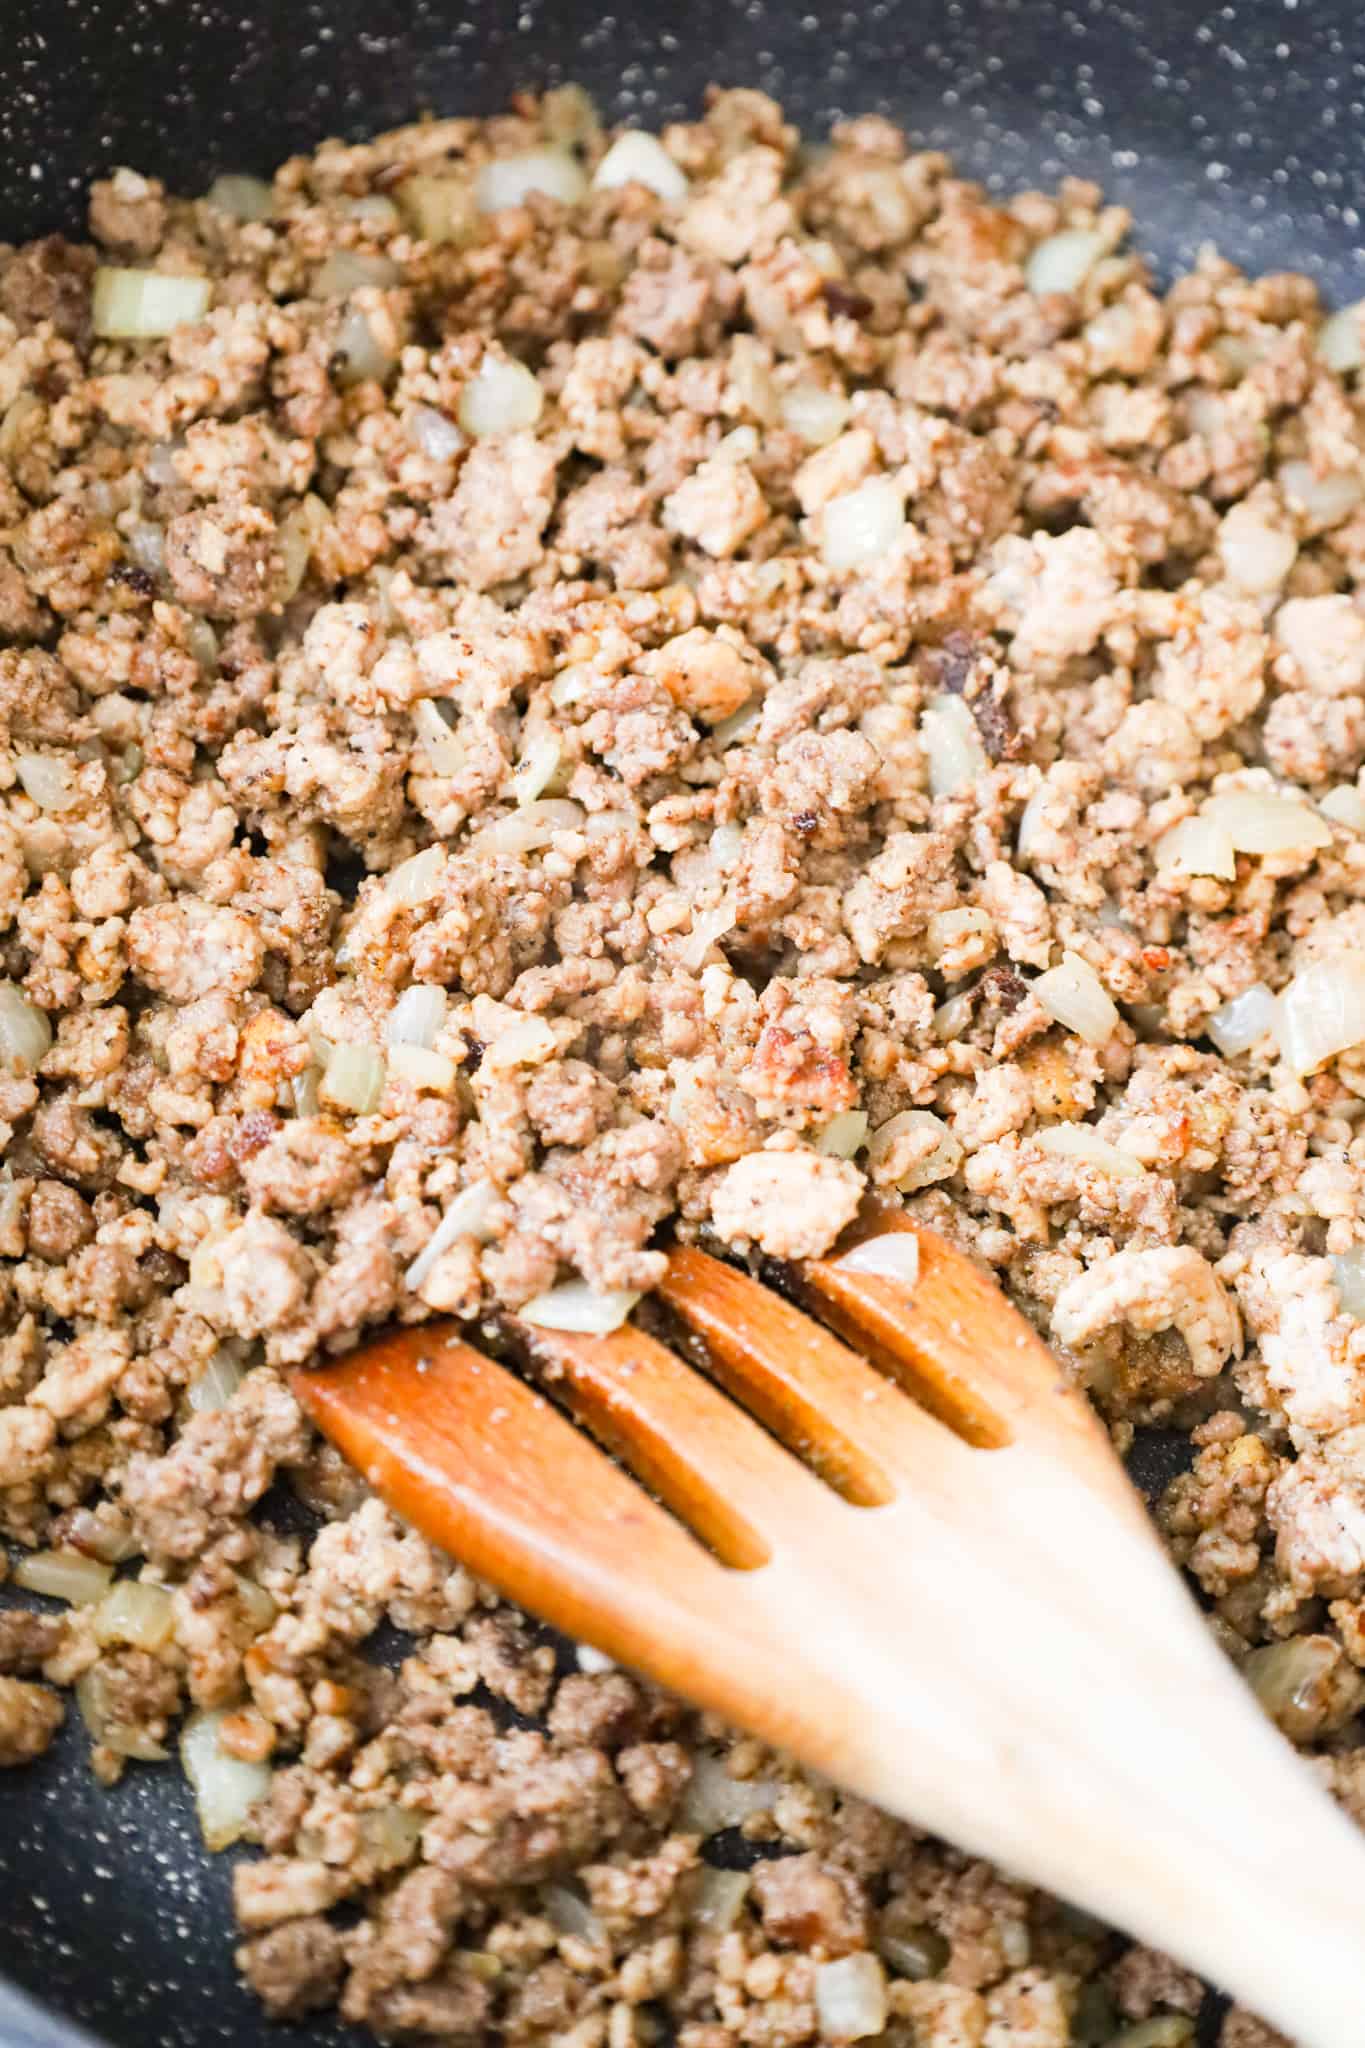 cooked ground beef, ground pork and diced onions in a saute pan